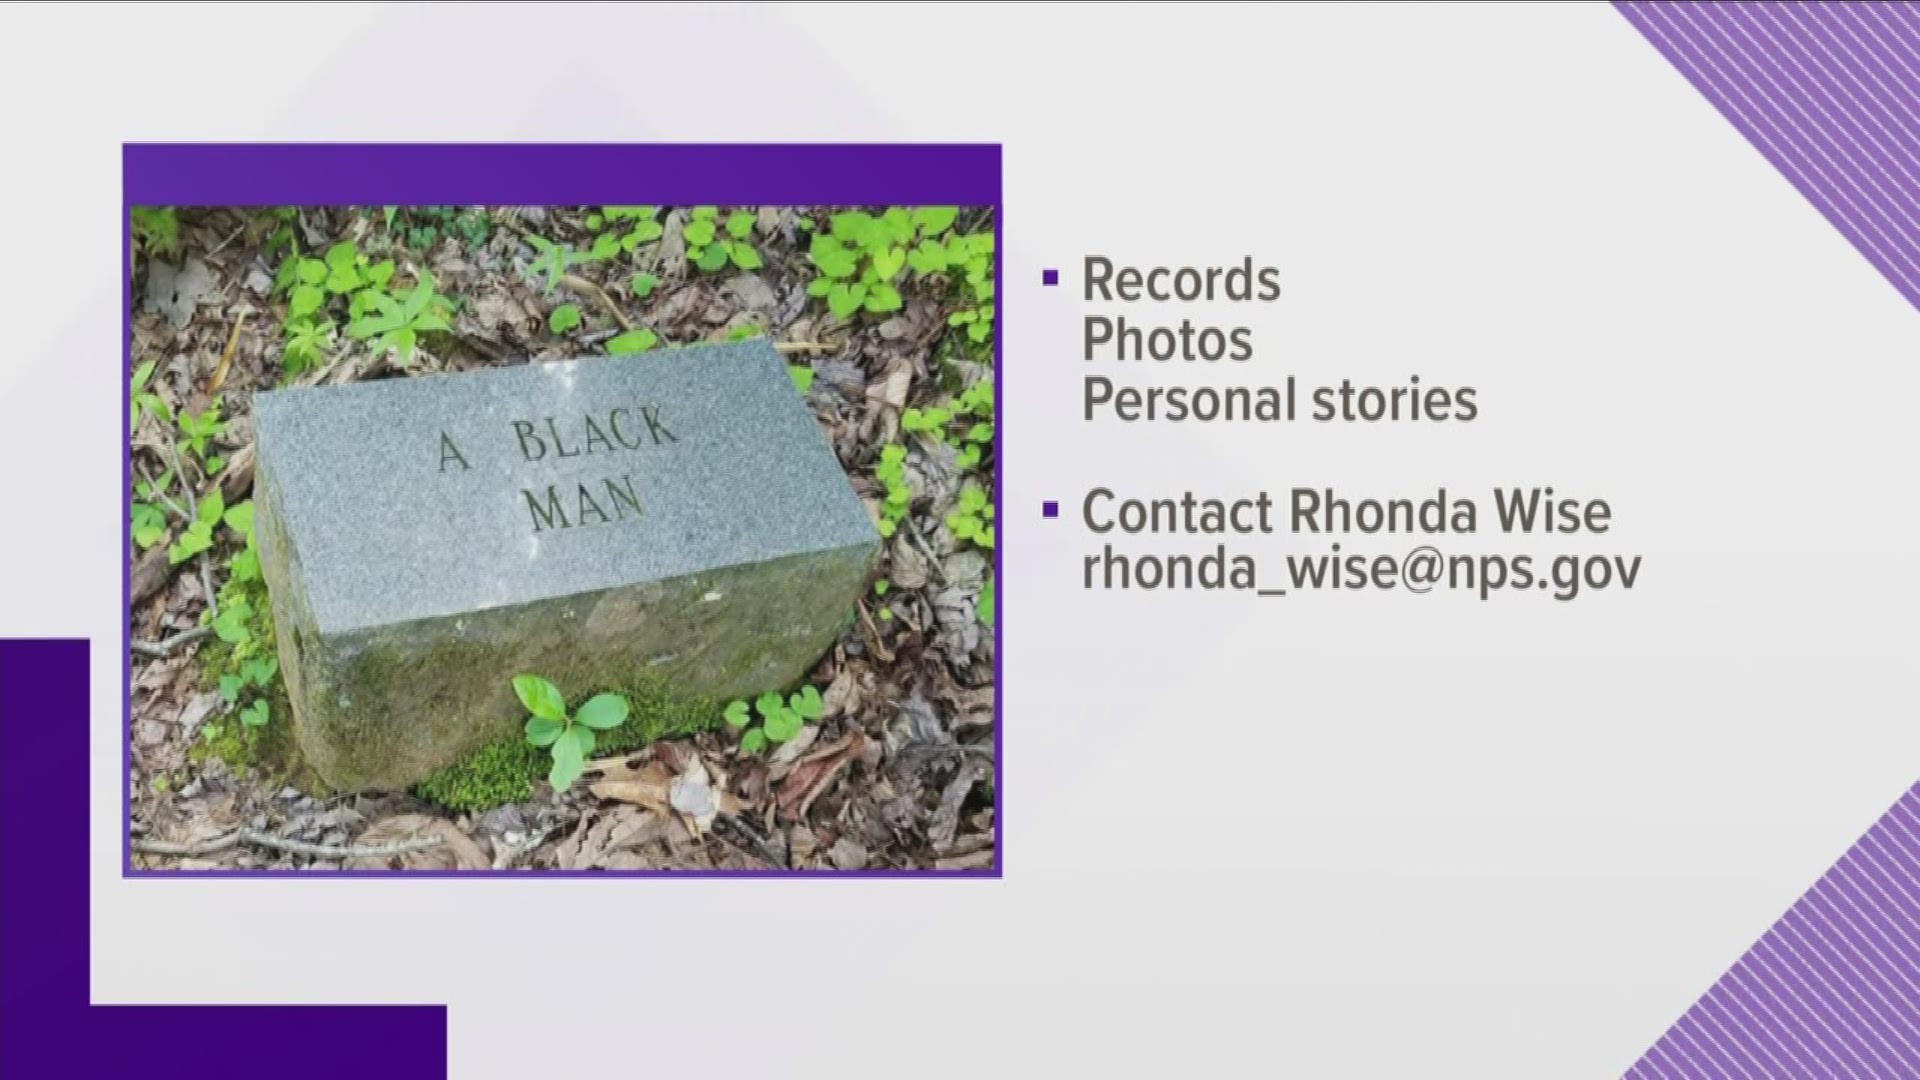 The Great Smoky Mountains National Park is asking for help from the public to identify African Americans buried long ago who remain nameless and faceless.